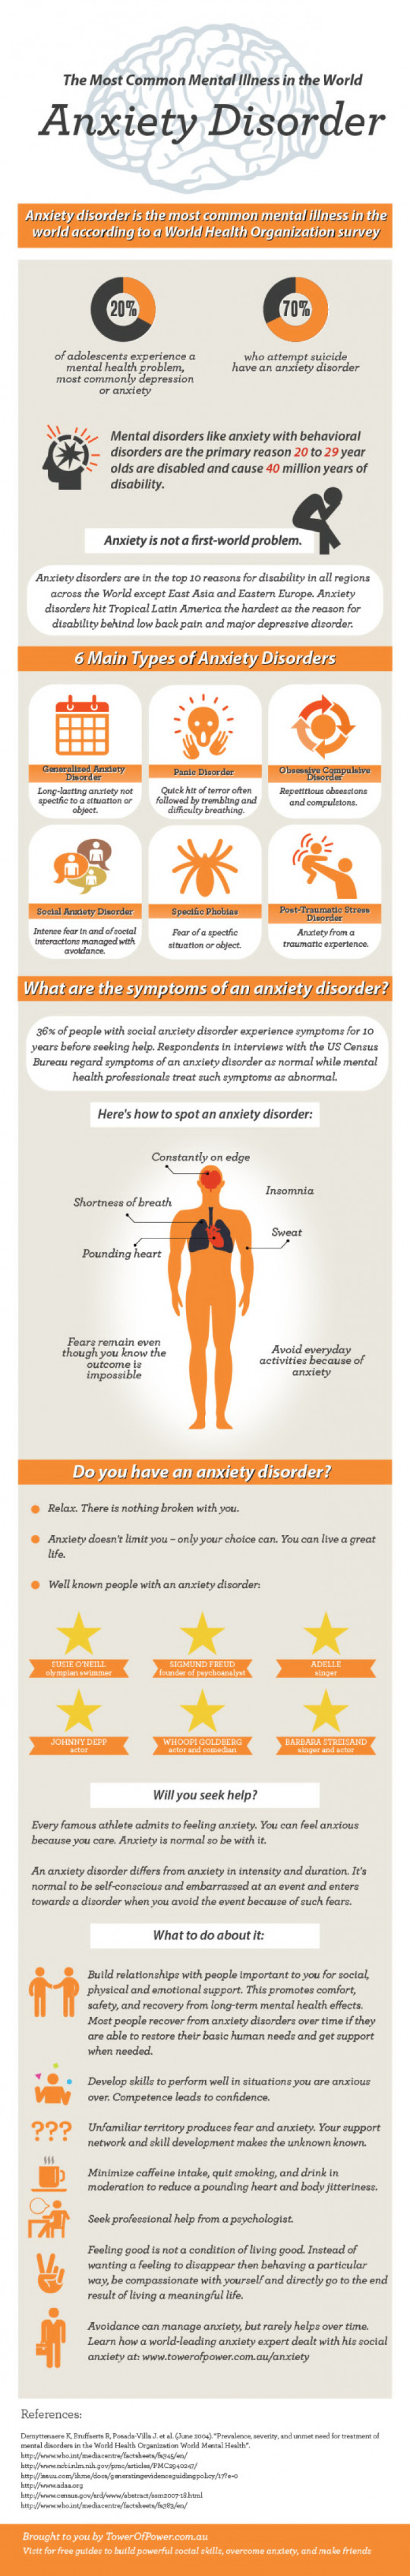 Surprising Facts About Anxiety Disorders â�� 7 Ways to Cope